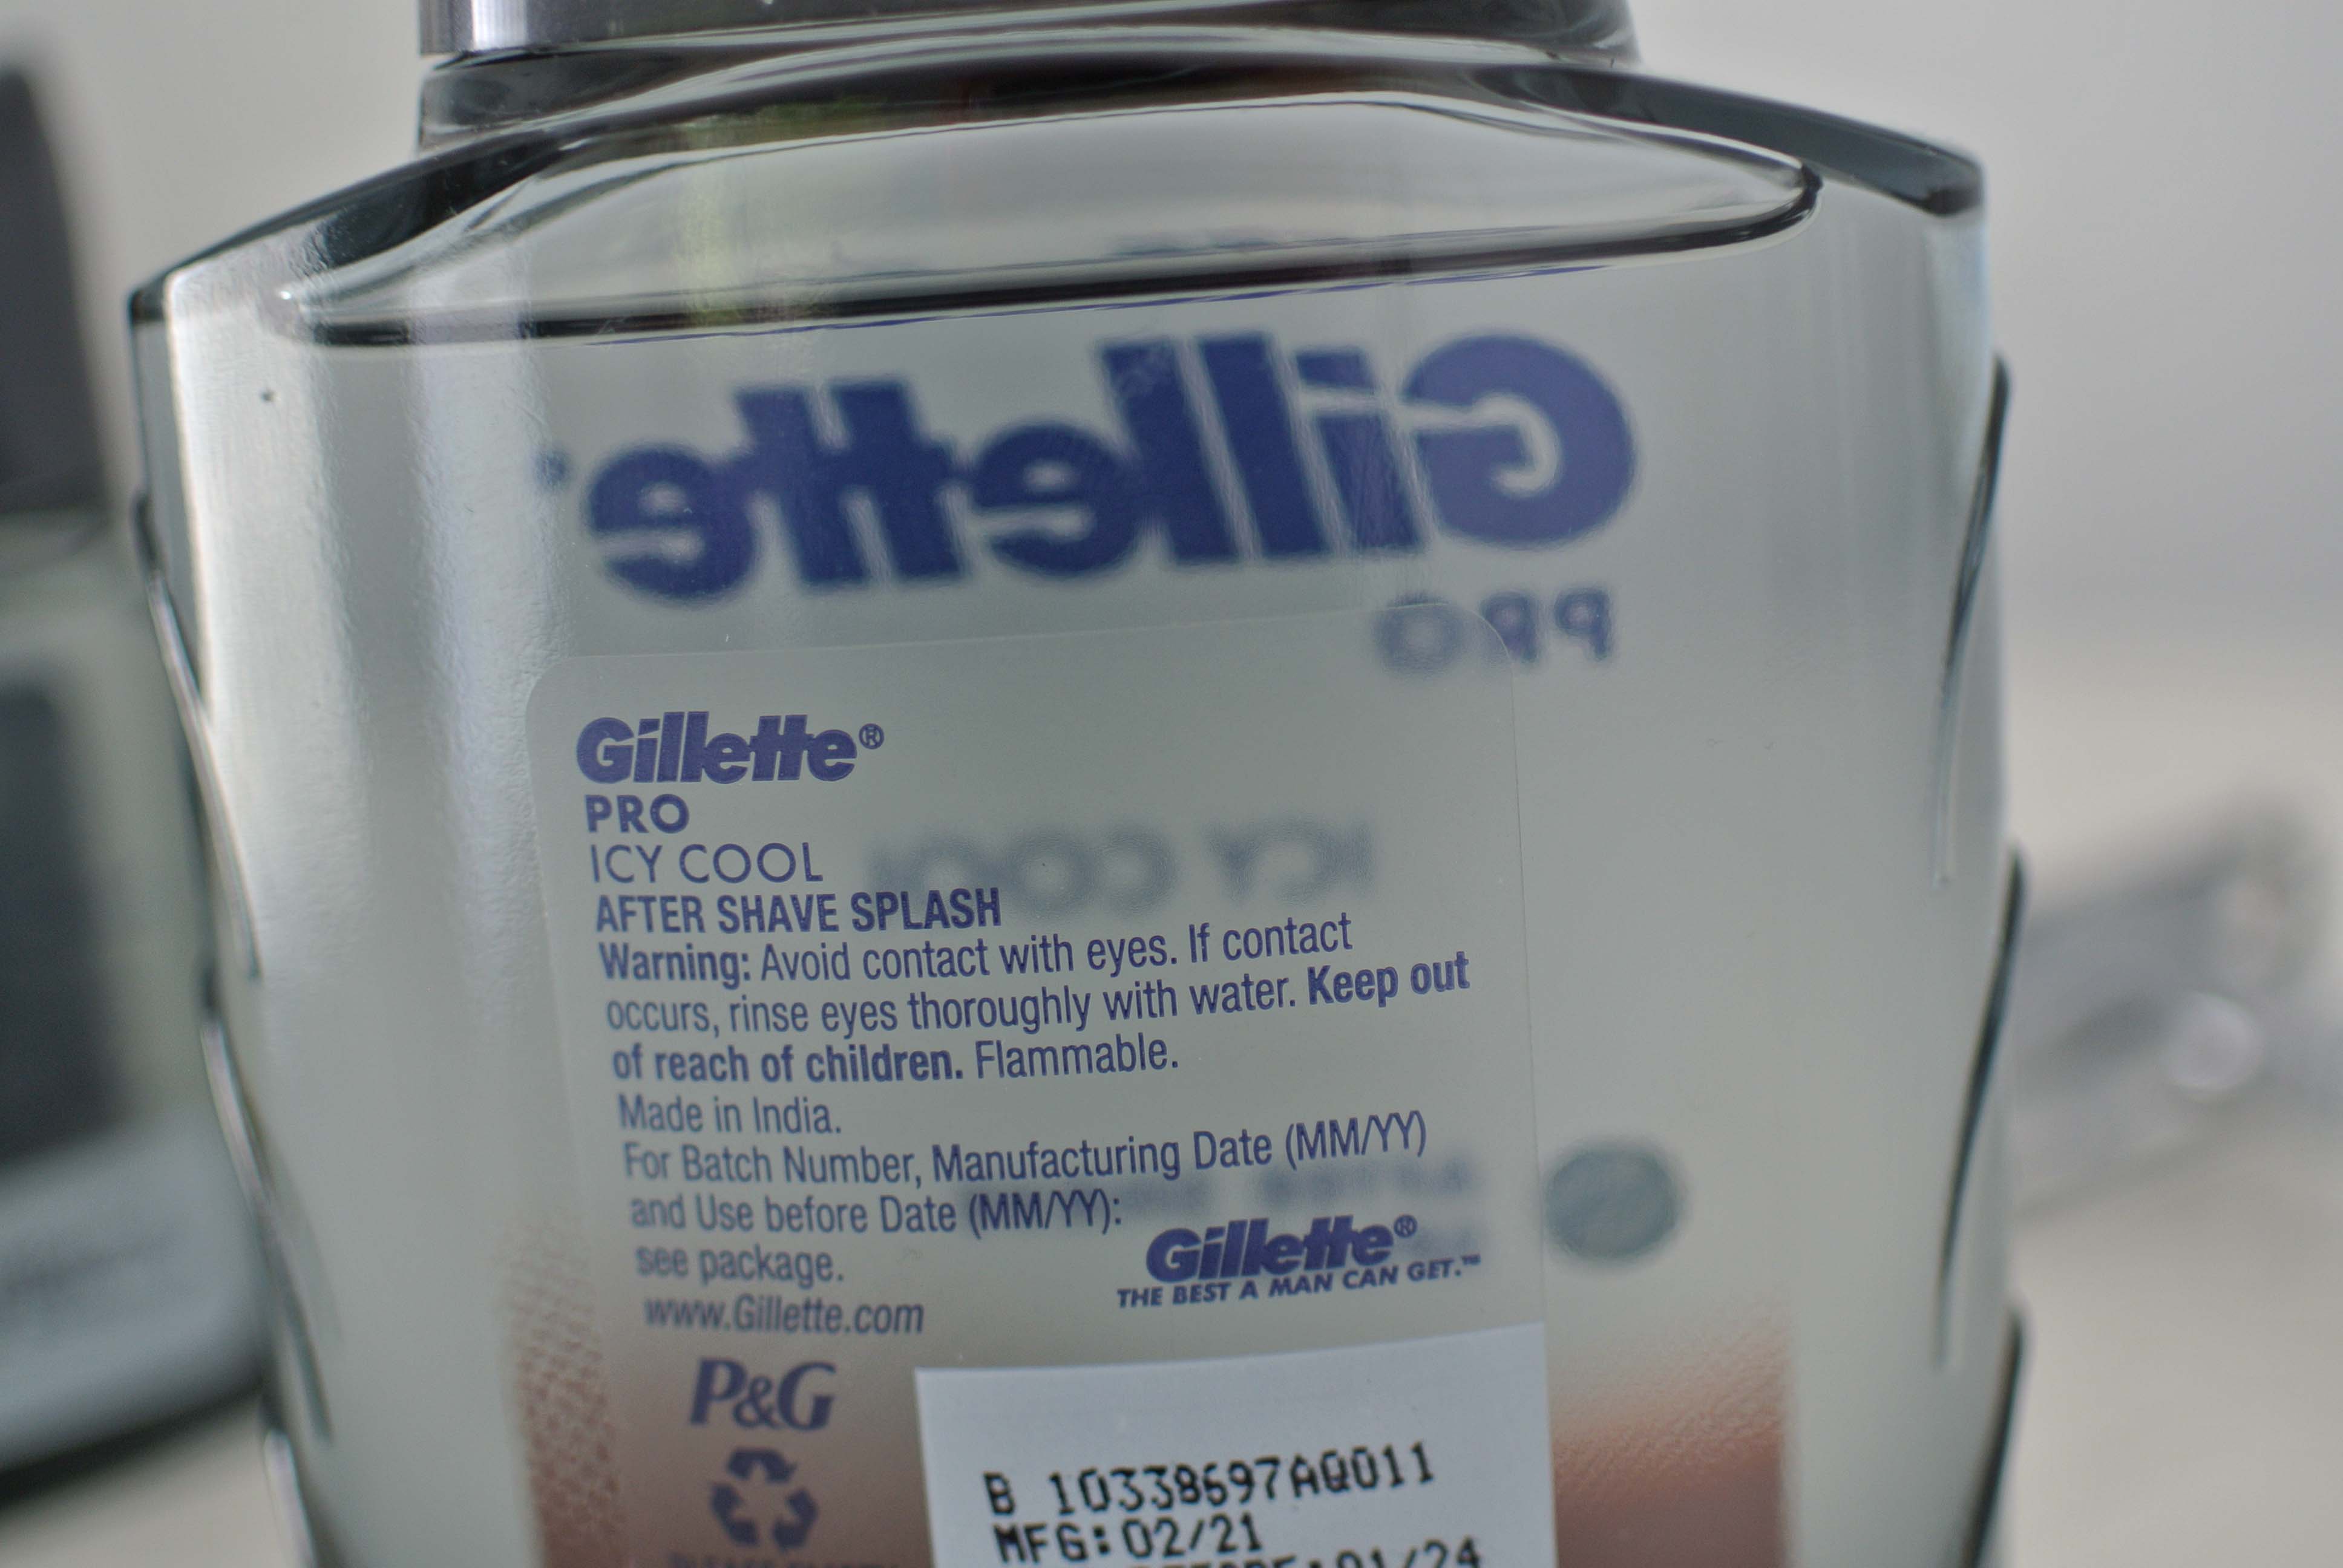 
Gillette Icy Cool Label
